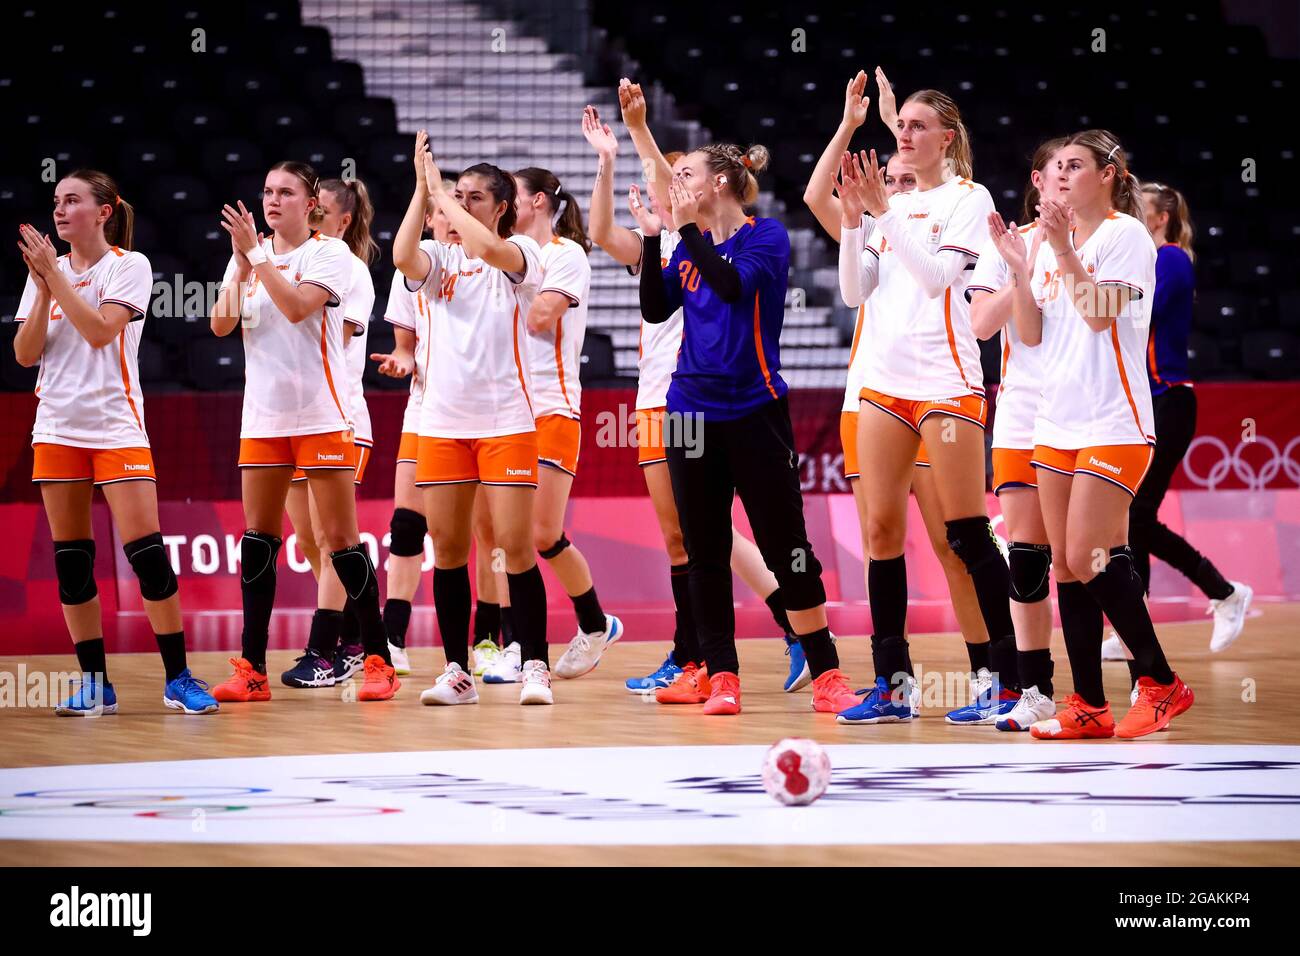 TOKYO, JAPAN - JULY 31: Bo van Wetering of the Netherlands, Merel Freriks of the Netherlands, Martine Smeets of the Netherlands, Rinka Duijndam of the Netherlands, Kelly Dulfer of the Netherlands and Angela Malestein of the Netherlands during the Tokyo 2020 Olympic Womens Handball Tournament match between Norway and Netherlands at Yoyogi National Stadium on July 31, 2021 in Tokyo, Japan (Photo by Orange Pictures) NOCNSF House of Sports Stock Photo